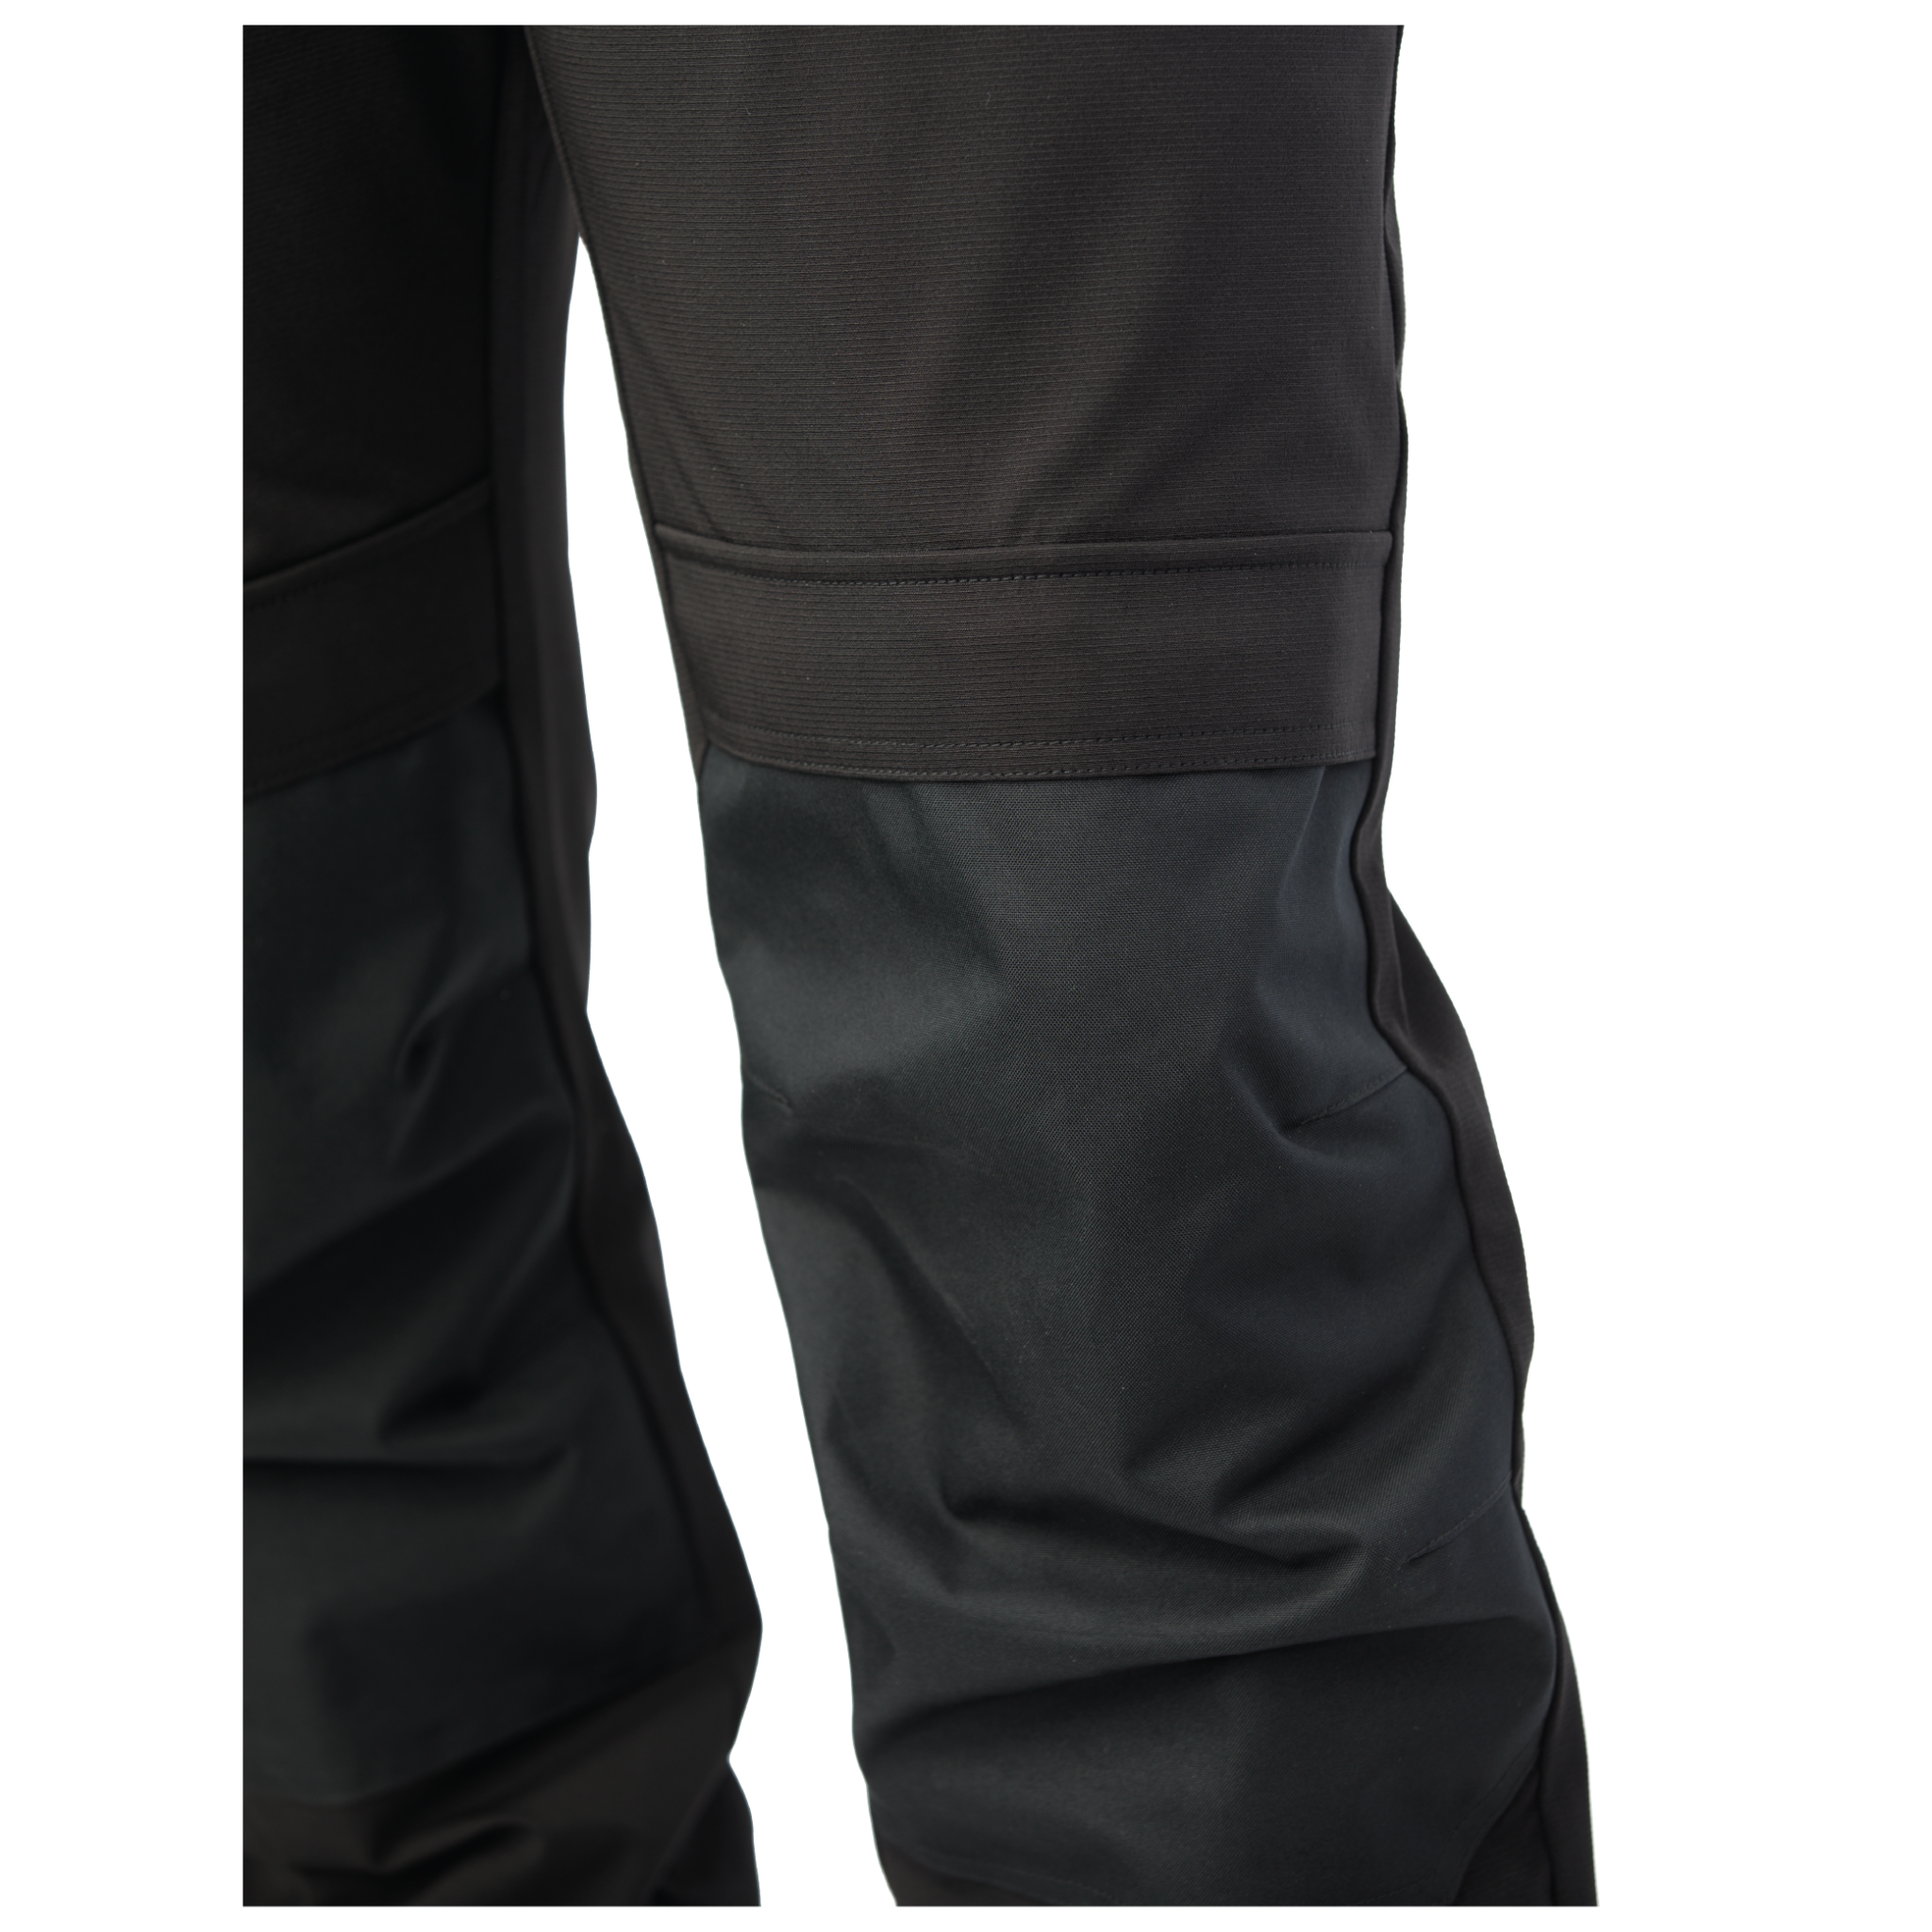 Tough Duck Men's WP14 Comfort Fit Free Flex Jogger with Tapered Leg Sizes S-2XL